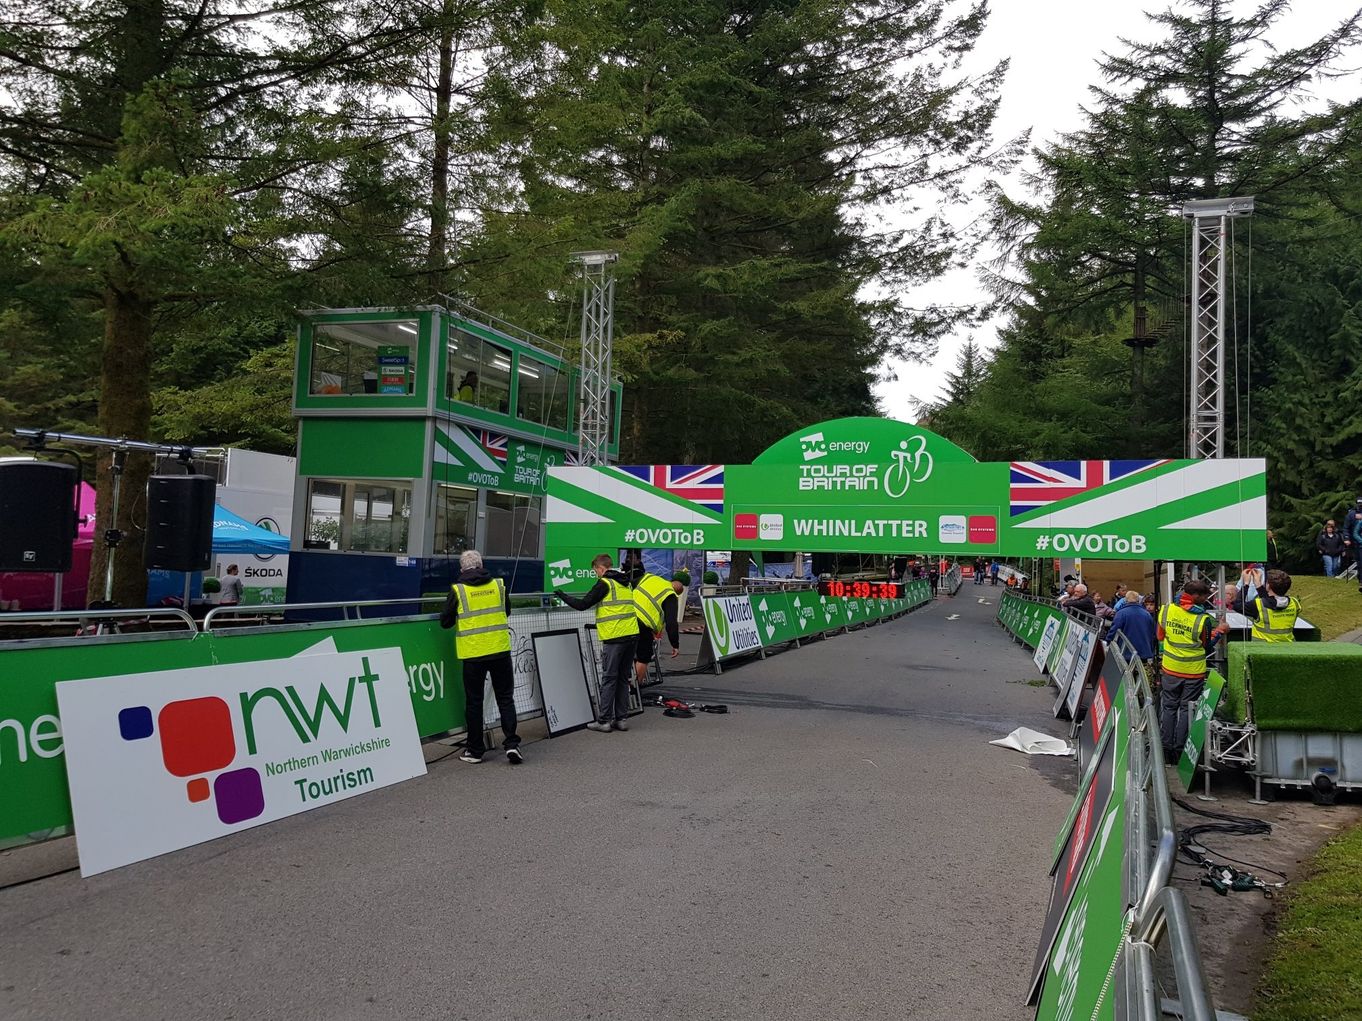 Tour of britain stage finish line at Whinlatter